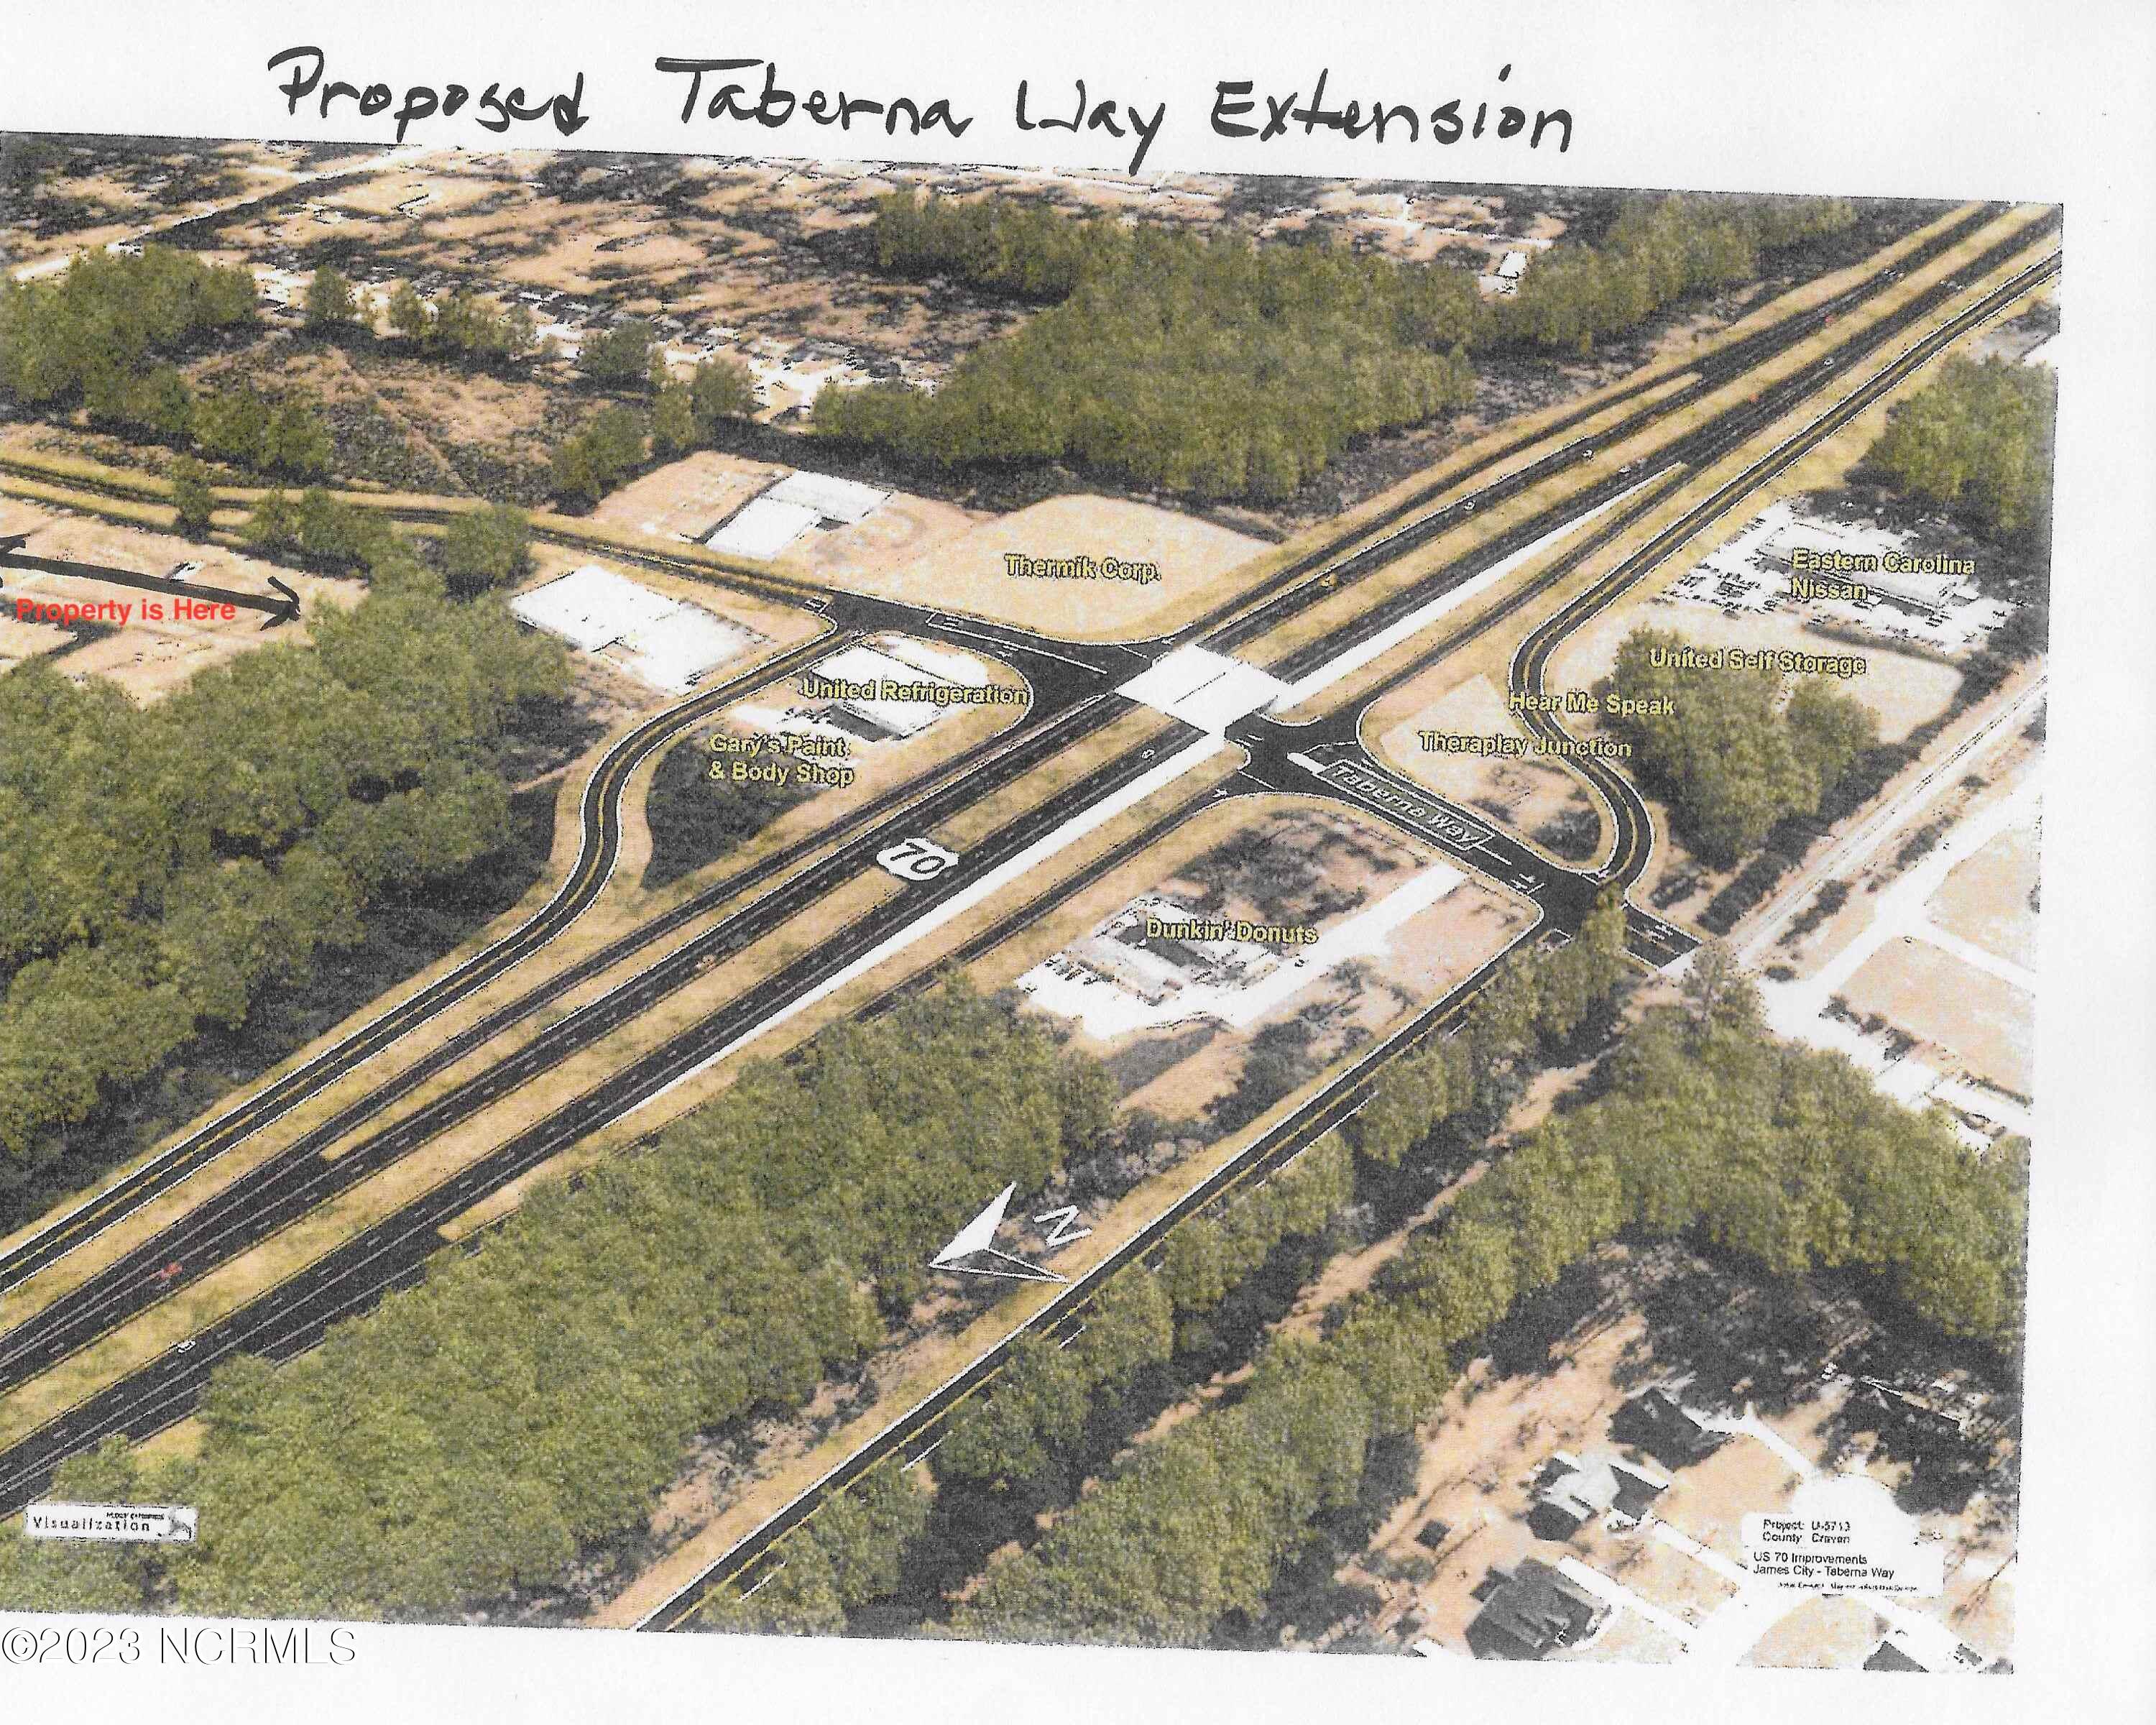 Proposed Taberna Way Extension